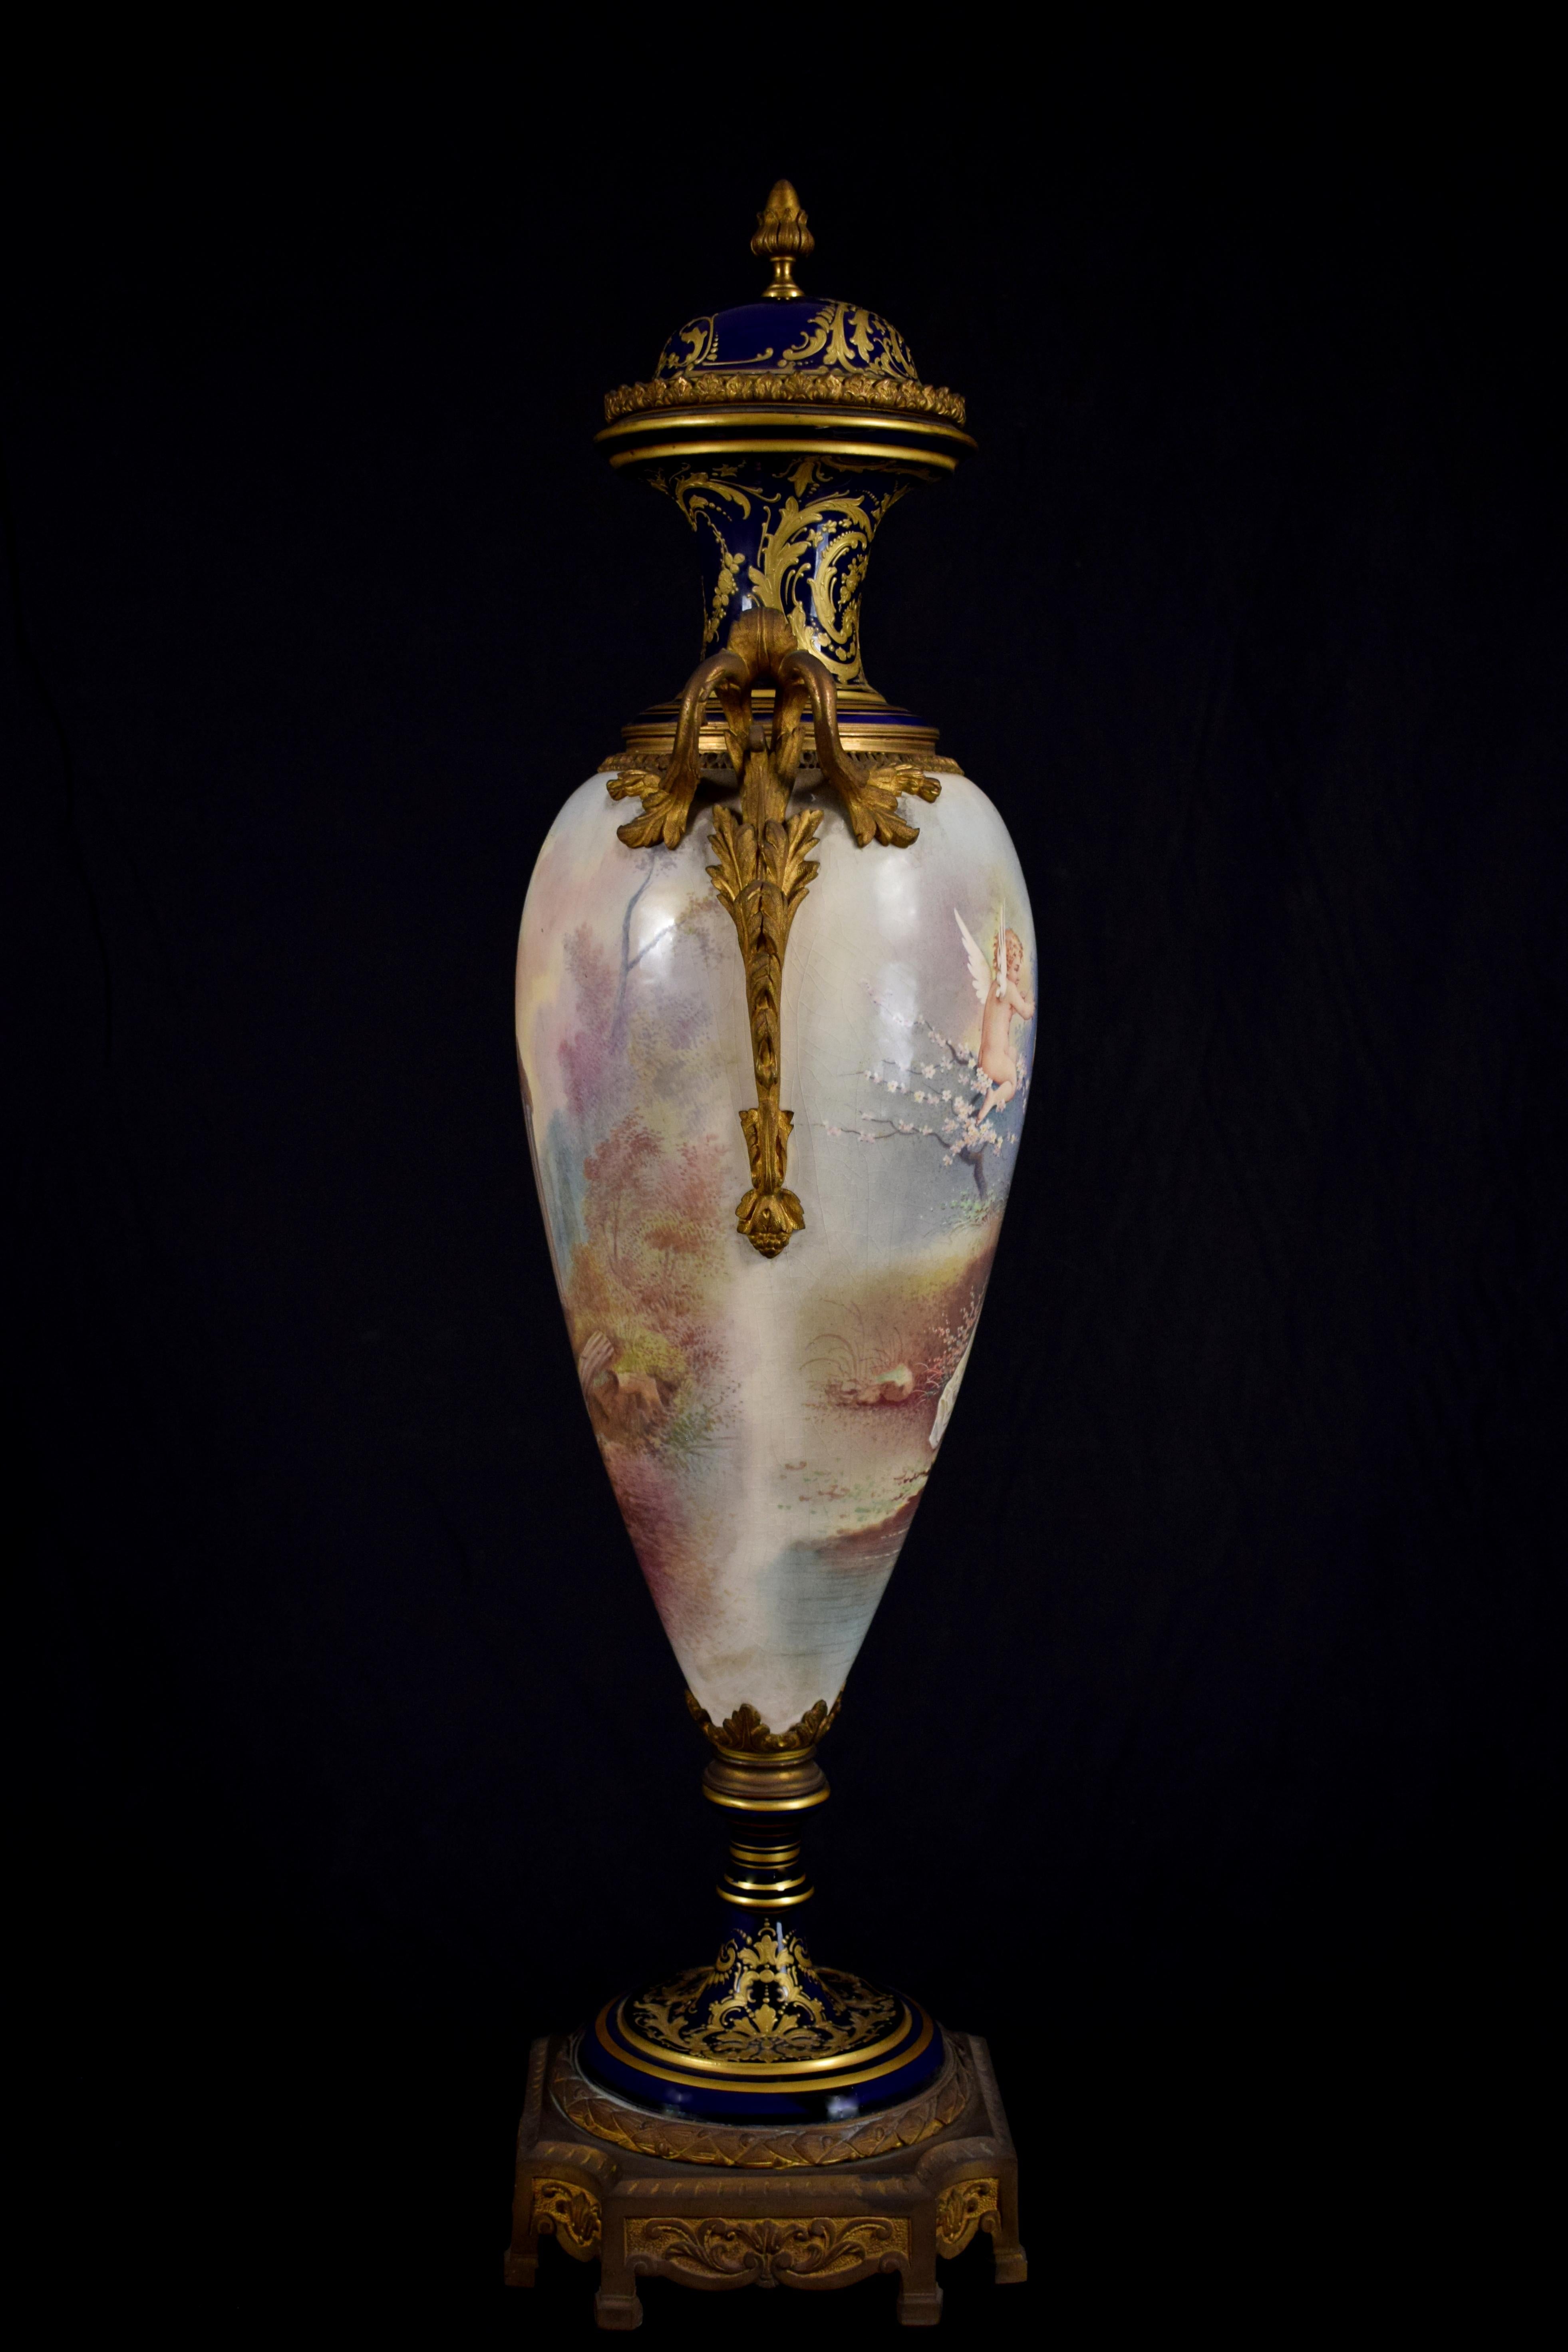 A fine quality French Sèvres style porcelain vase, late 19th century, in porcelain cobalt-blue, finely painted and decorated with gilt bronze. The painting represent “Cupid and Venus”. Cupid is depicted as a child, with two wings on his back, and he